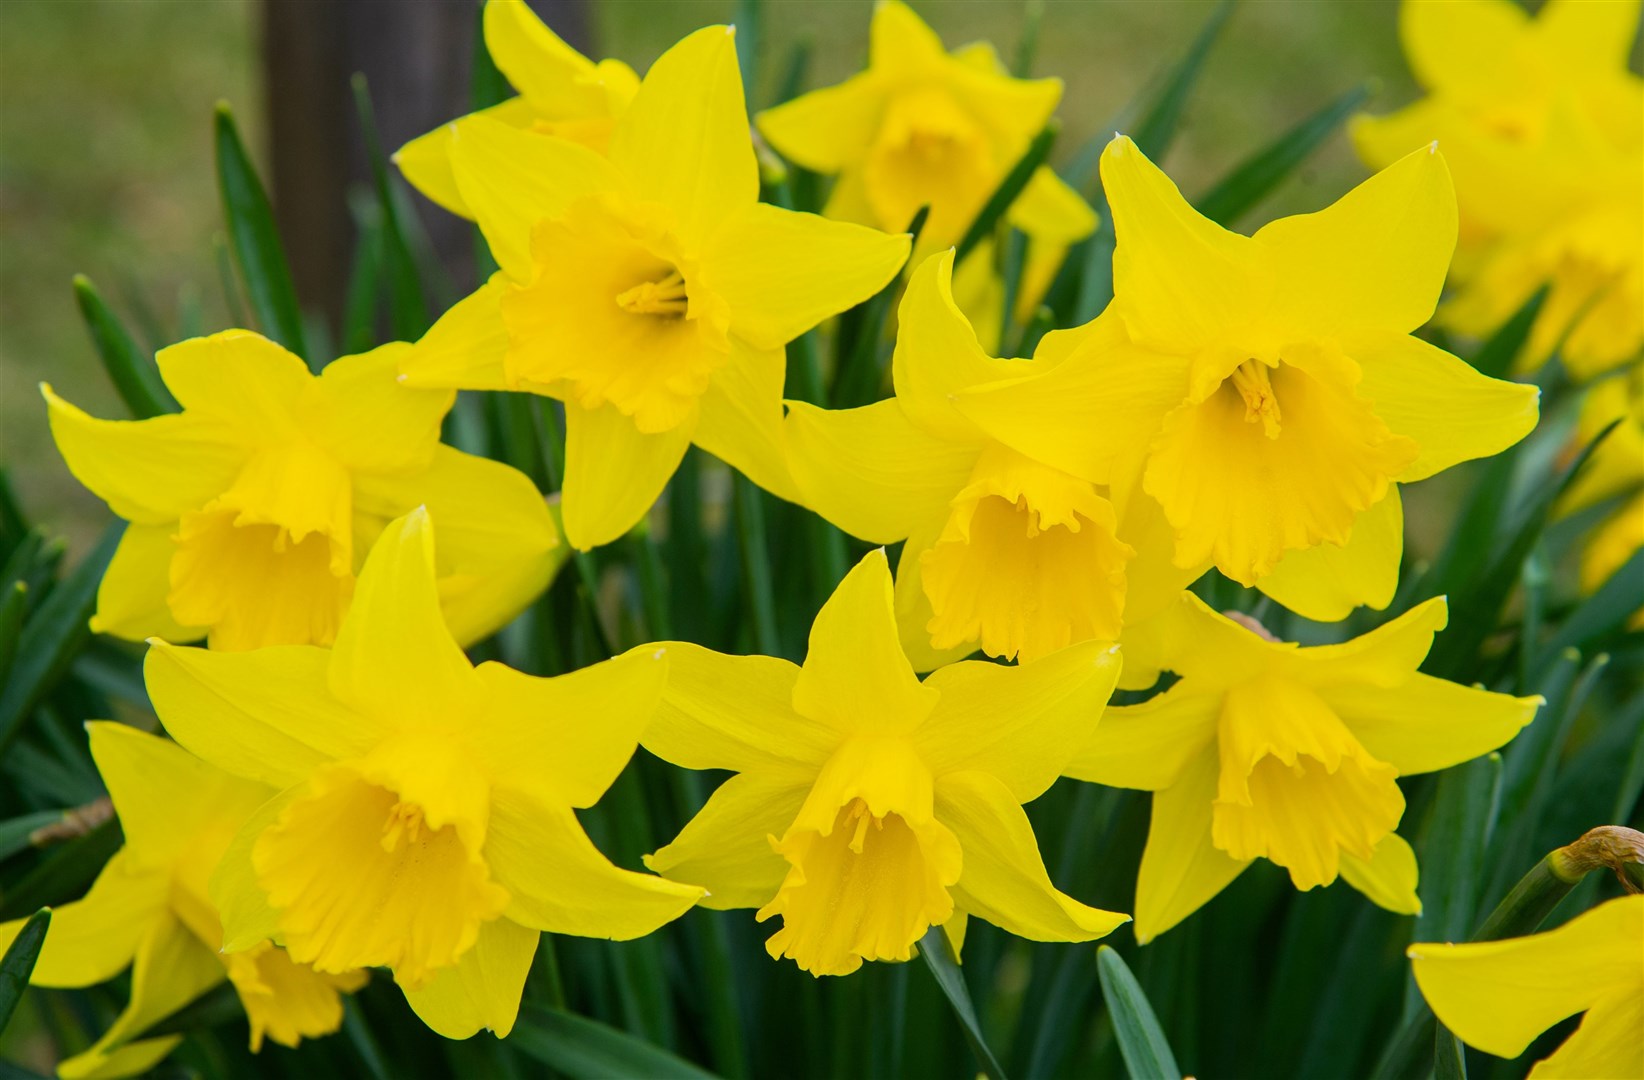 The Daffodil Day fundraiser in aid of Marie Curie takes place in Tain’s Duthac Centre on Saturday (April 13).